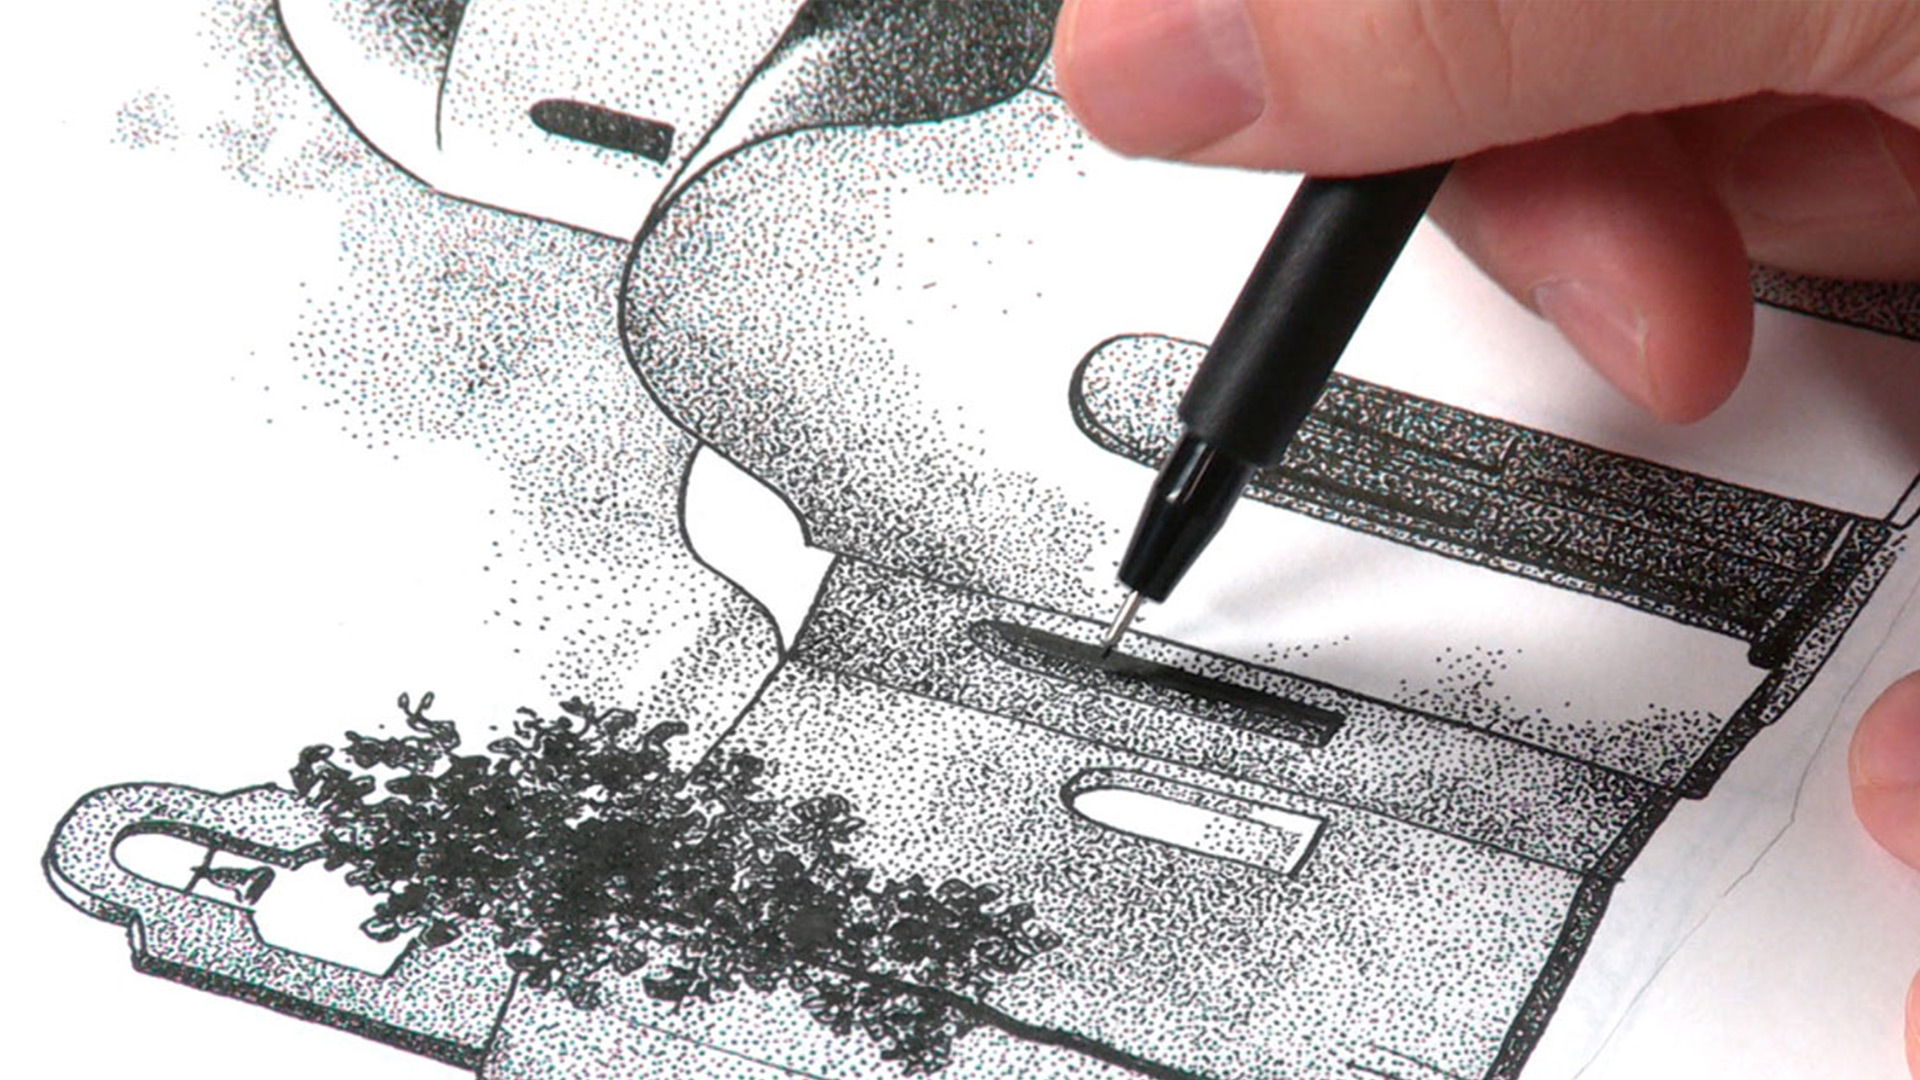 Stippling with Pen and Ink - Art Starts